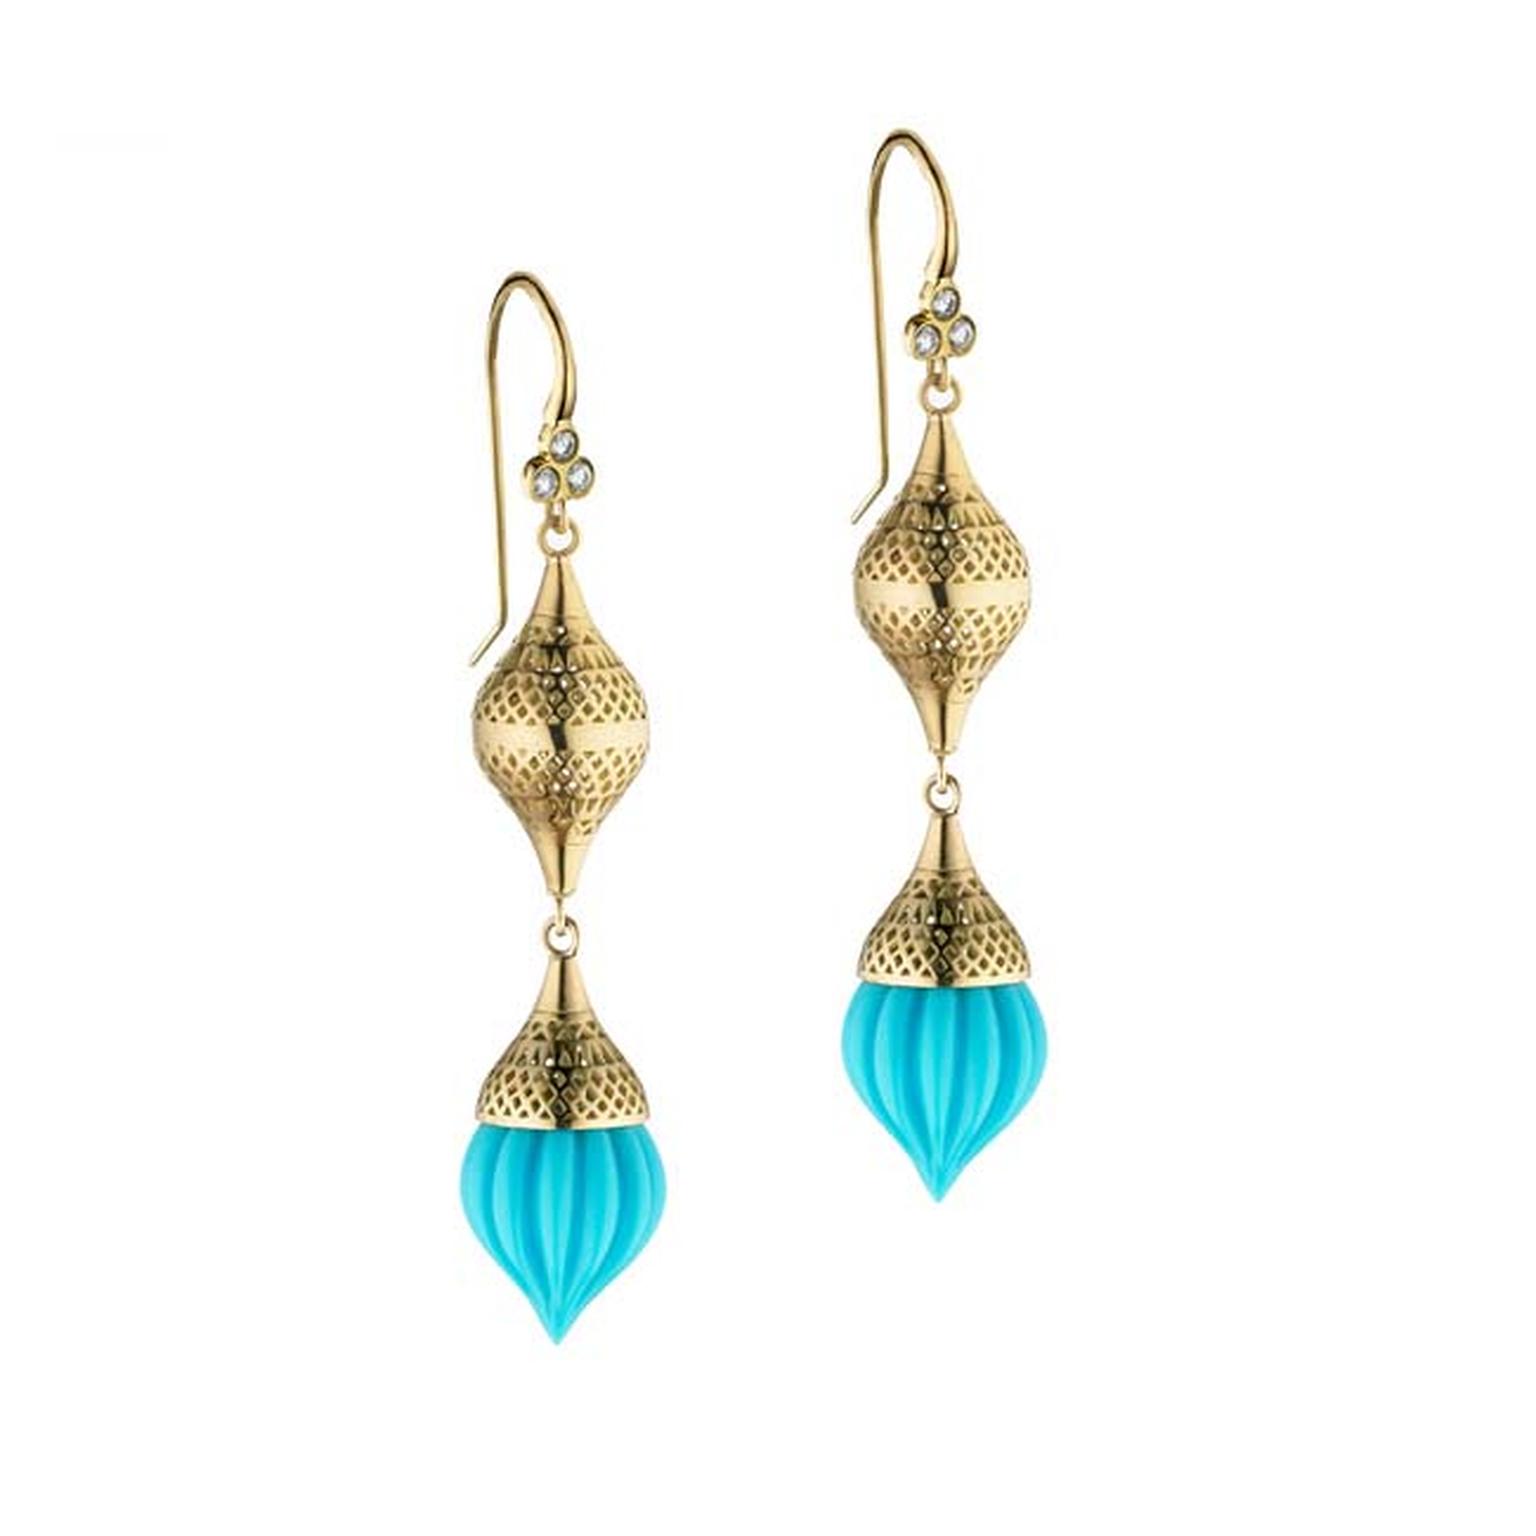 Ray Griffiths Sleeping Beauty turquoise earrings in gold with crownwork finial on triple diamond hooks ($5,690).